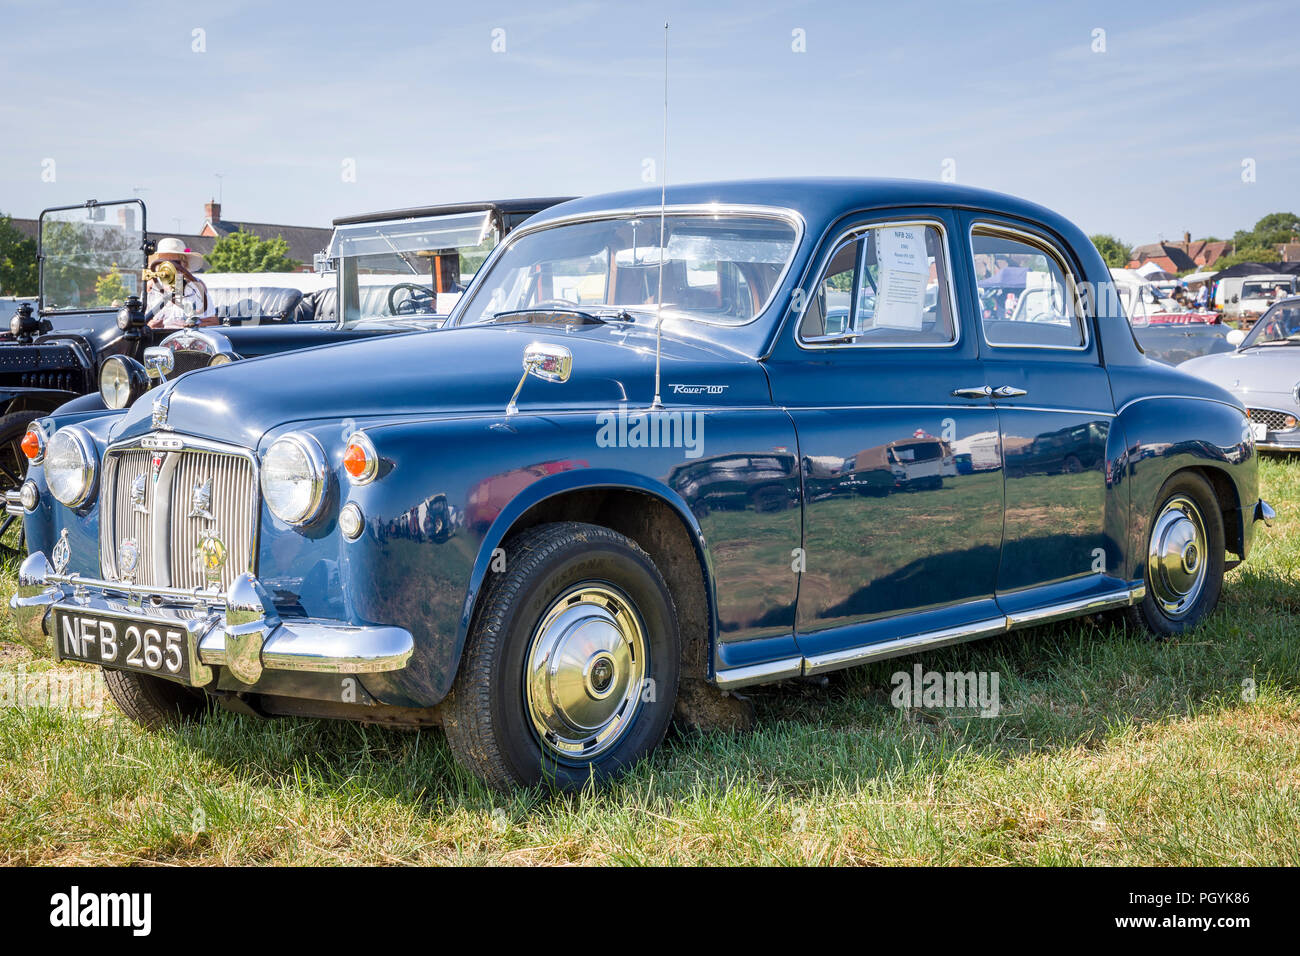 An old Rover 100 saloon on display at Heddington Country Show 2018 in Wiltshire England UK Stock Photo